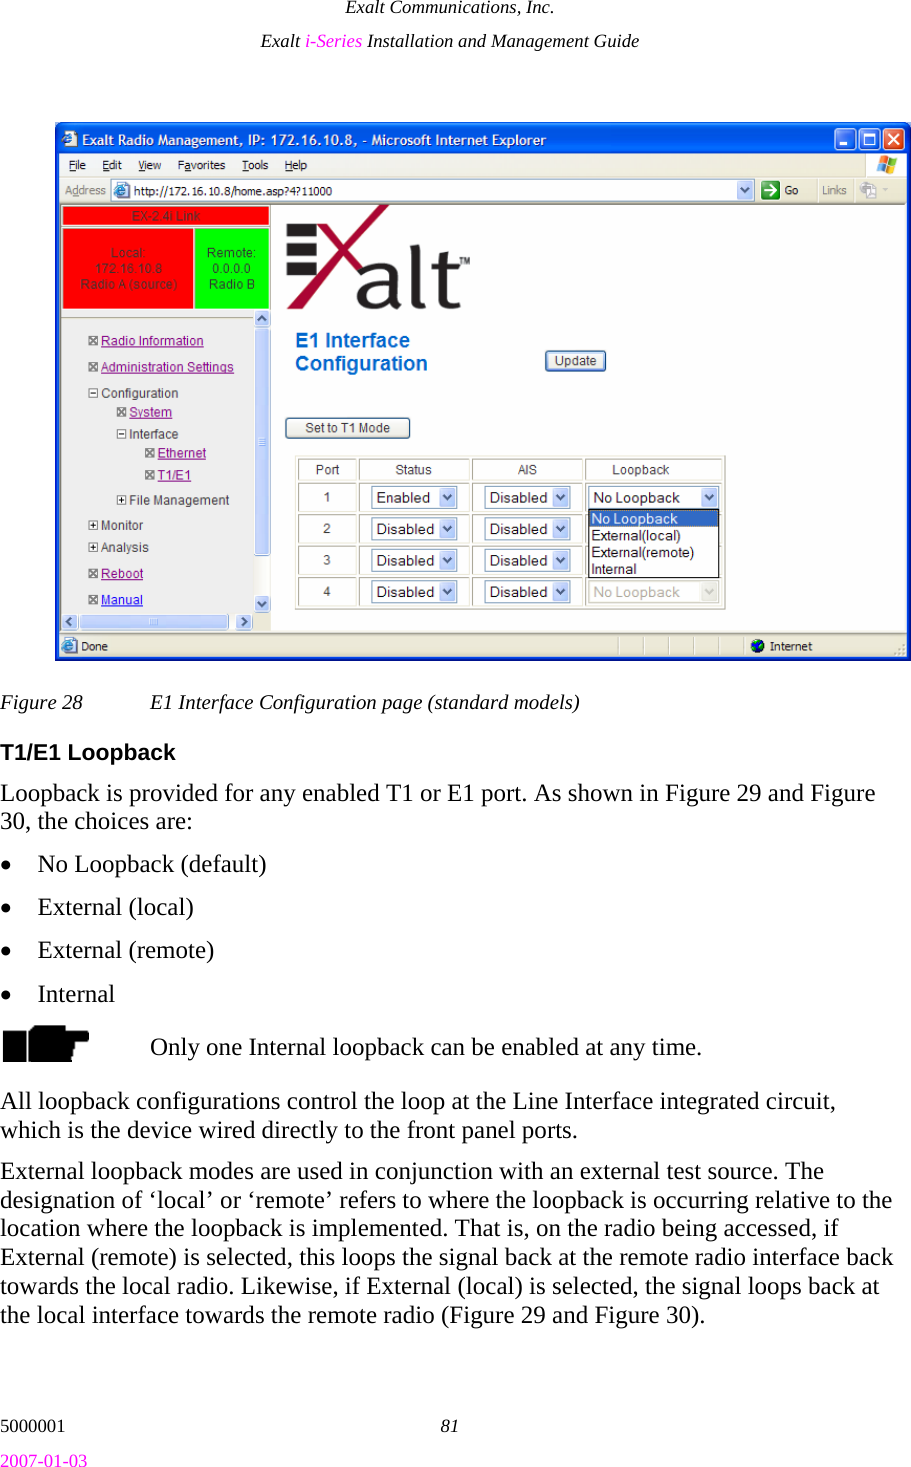 Exalt Communications, Inc. Exalt i-Series Installation and Management Guide 5000001  81 2007-01-03 Figure 28  E1 Interface Configuration page (standard models) T1/E1 Loopback Loopback is provided for any enabled T1 or E1 port. As shown in Figure 29 and Figure 30, the choices are: • No Loopback (default) • External (local) • External (remote) • Internal Only one Internal loopback can be enabled at any time. All loopback configurations control the loop at the Line Interface integrated circuit, which is the device wired directly to the front panel ports. External loopback modes are used in conjunction with an external test source. The designation of ‘local’ or ‘remote’ refers to where the loopback is occurring relative to the location where the loopback is implemented. That is, on the radio being accessed, if External (remote) is selected, this loops the signal back at the remote radio interface back towards the local radio. Likewise, if External (local) is selected, the signal loops back at the local interface towards the remote radio (Figure 29 and Figure 30).  